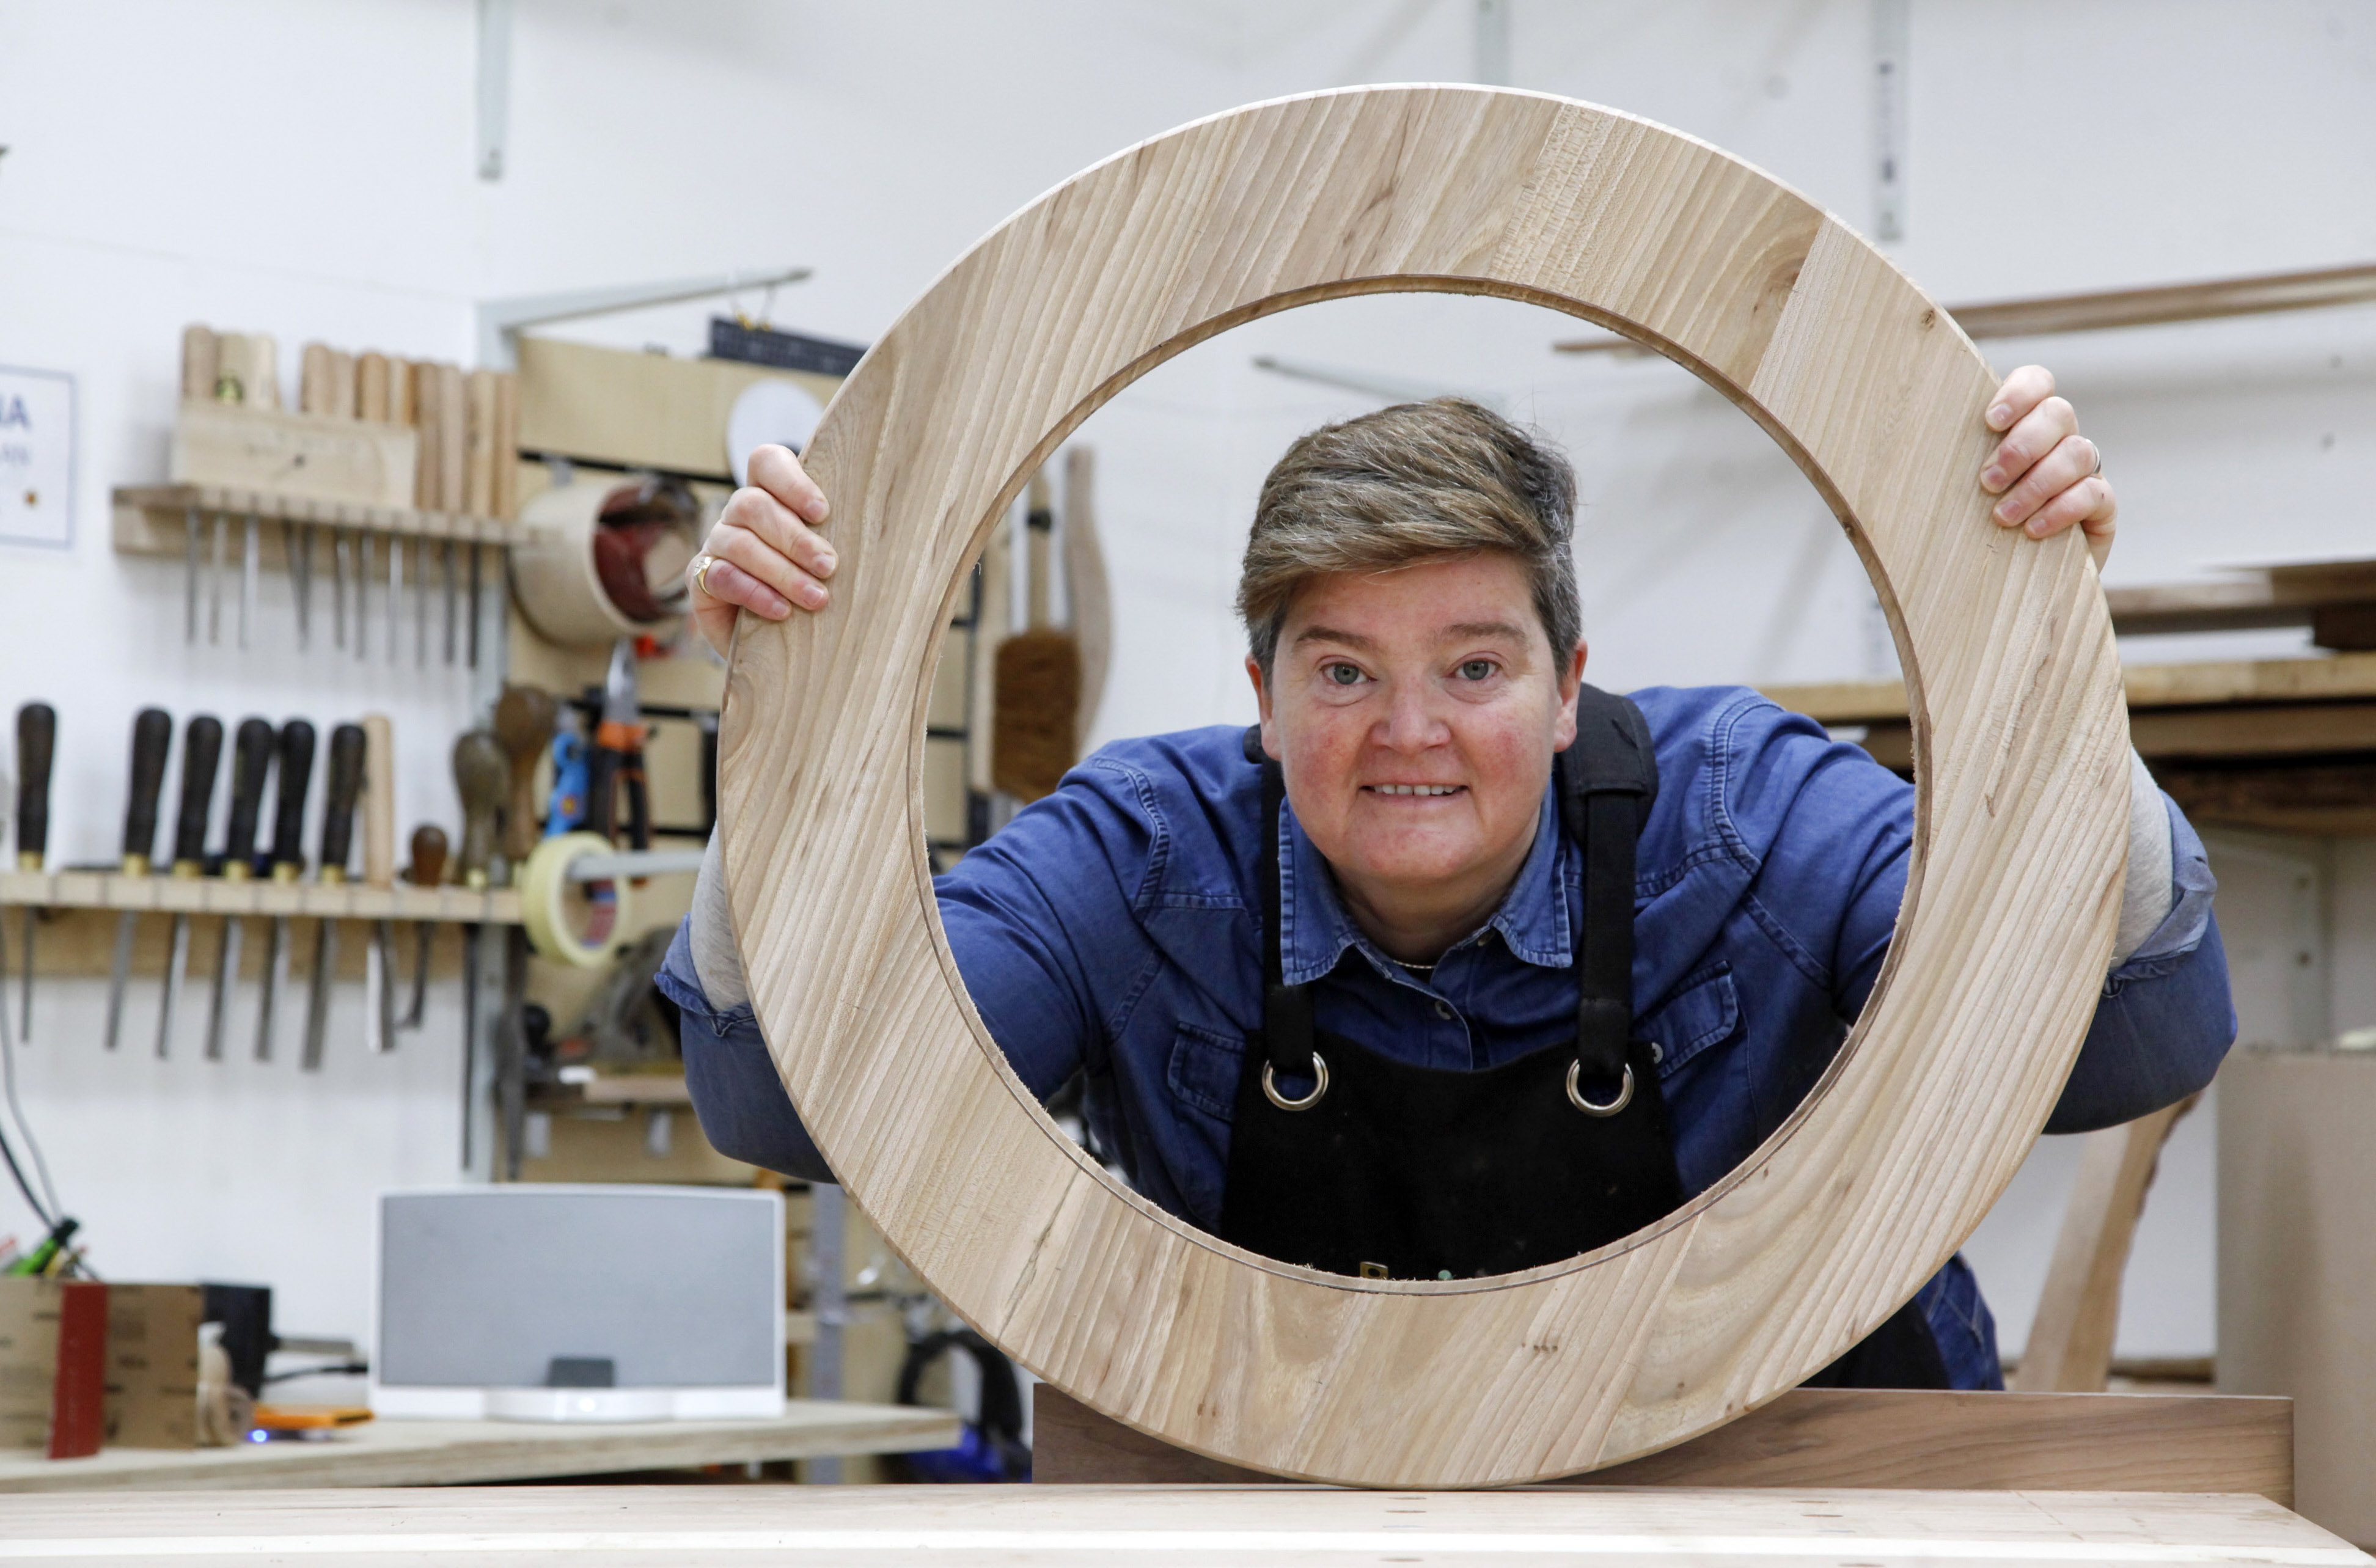 Fiona Gilfillan, a former RBS worker who now is a furniture maker